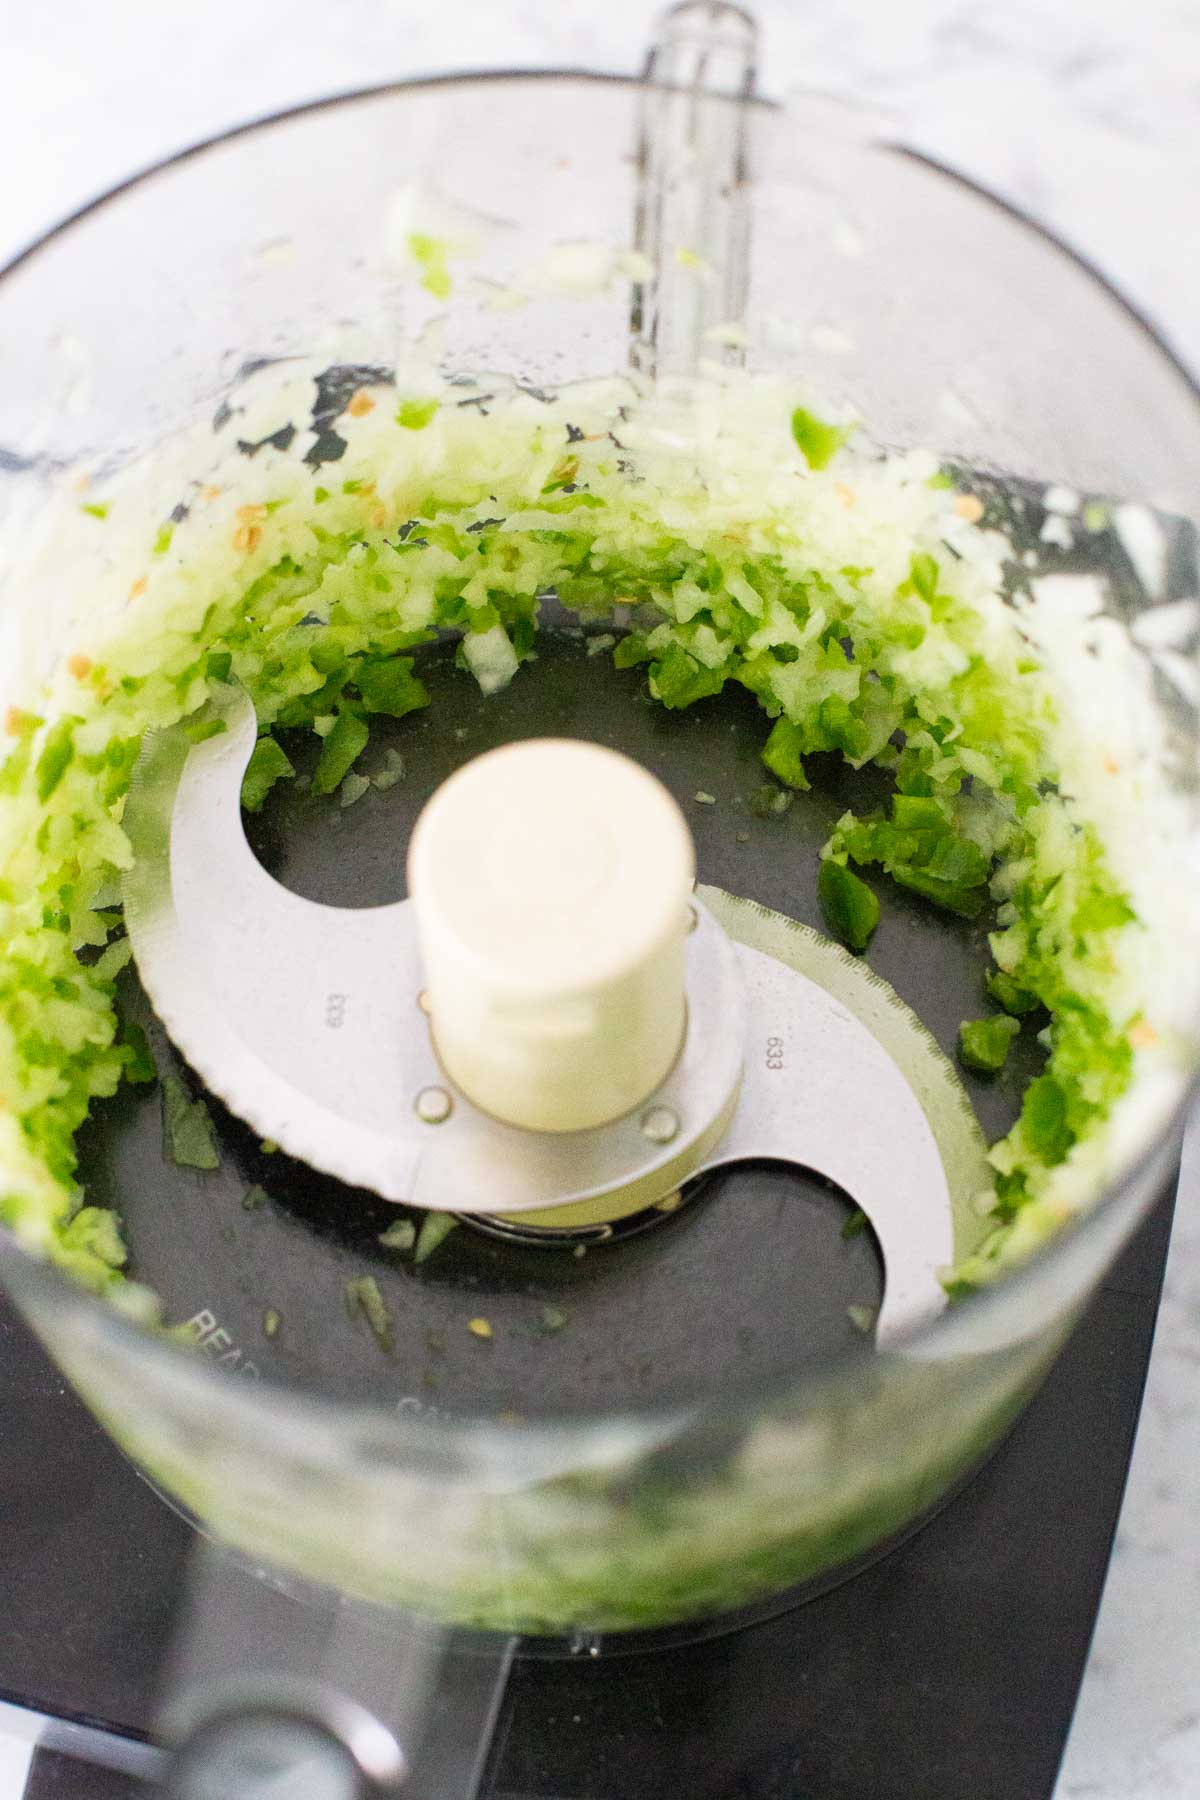 The fresh onion and jalapeno have been chopped in the bowl of a food processor with the blade attachement.